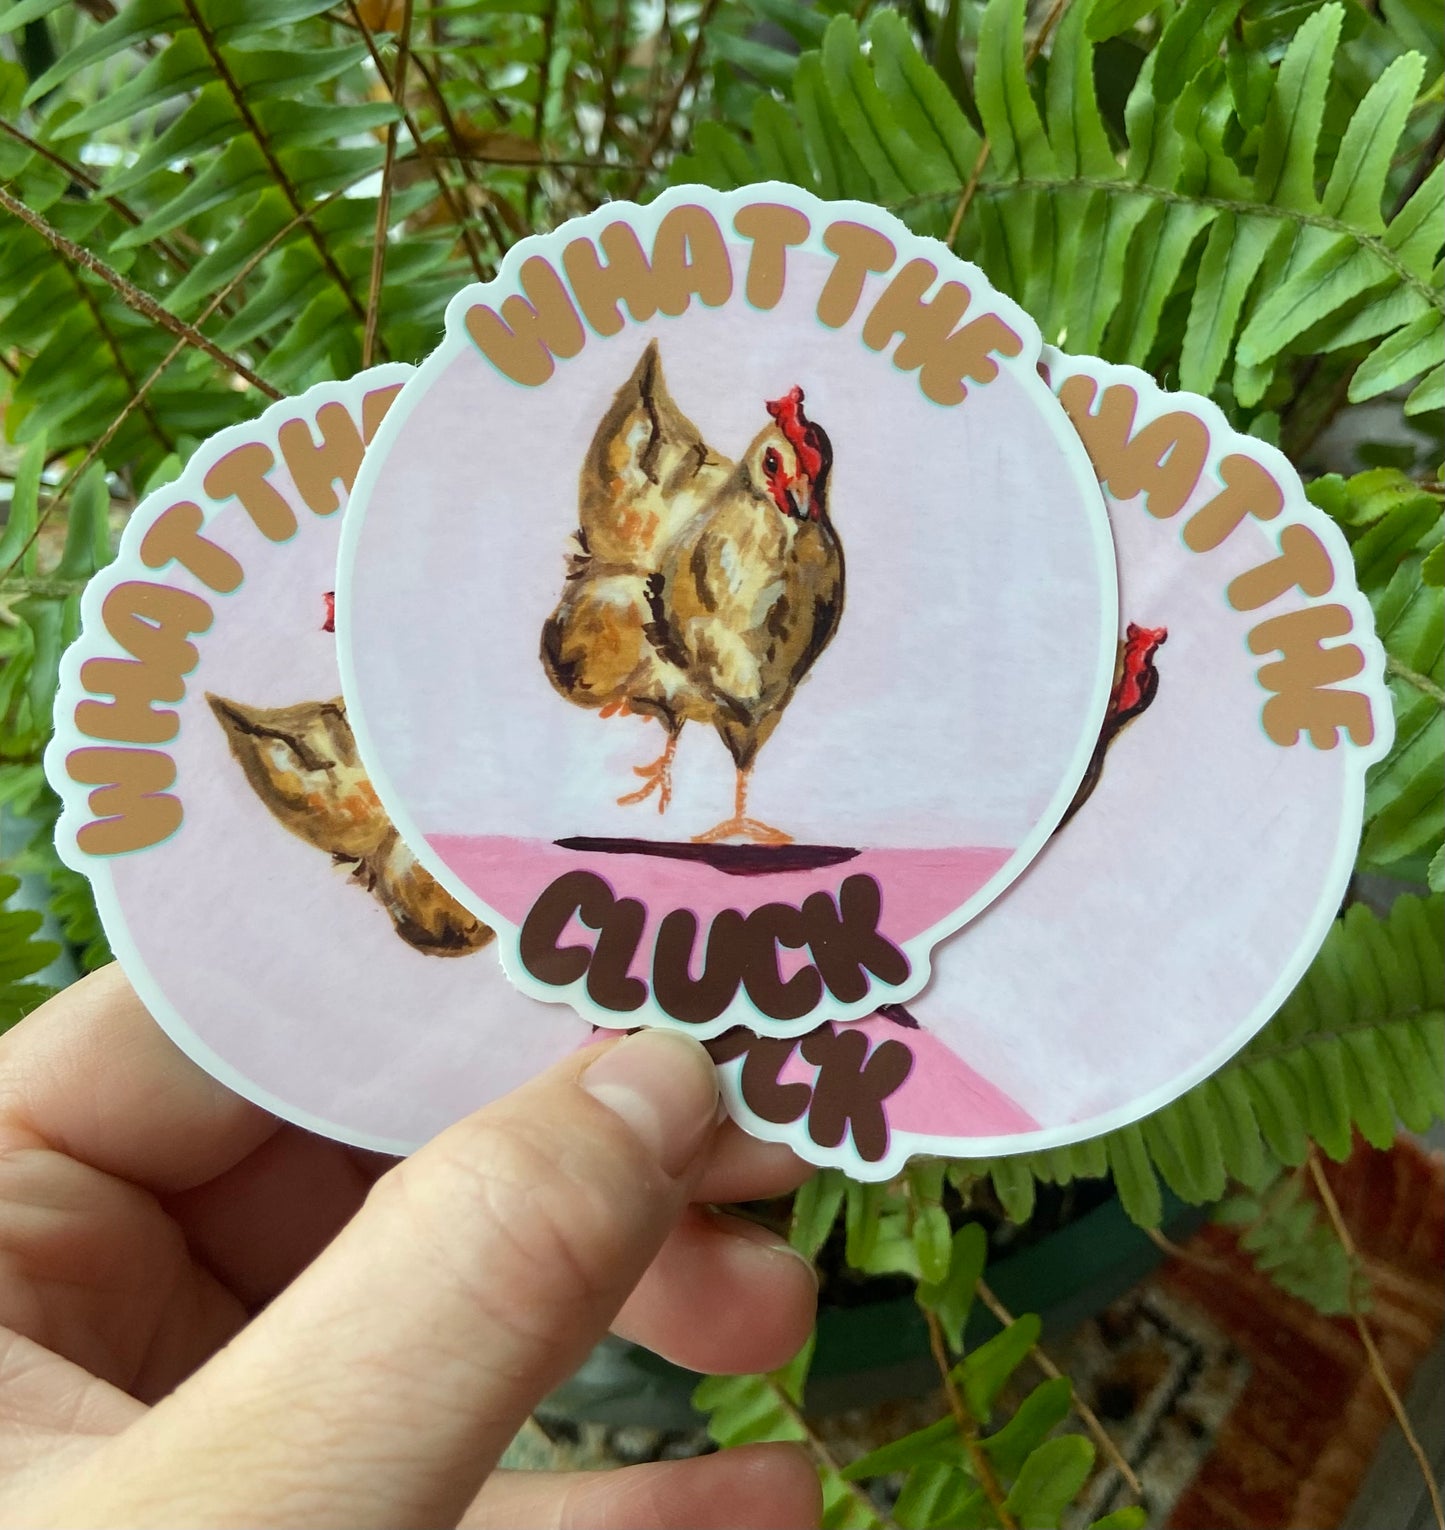 What the cluck?